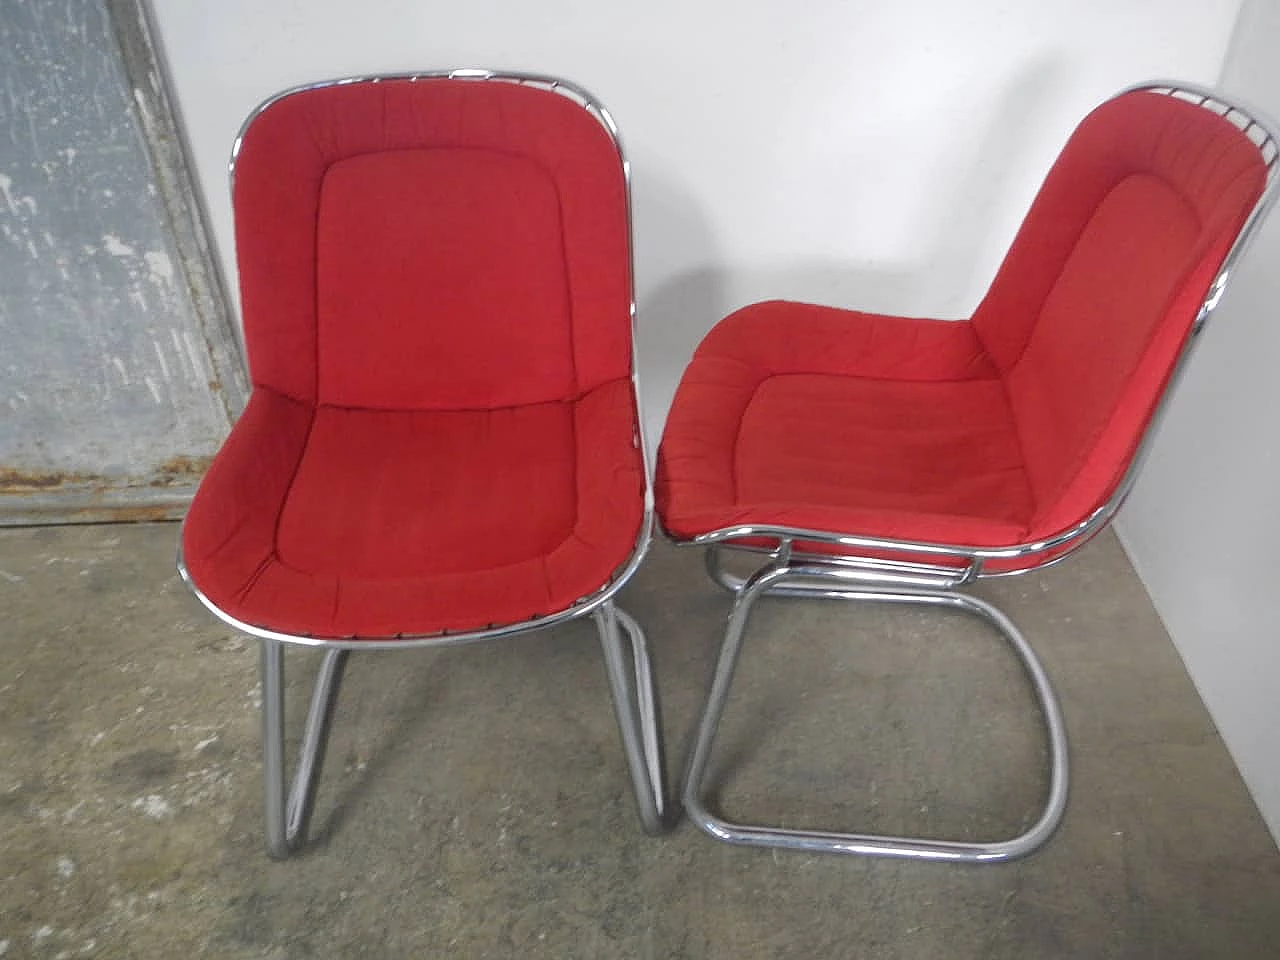 Pair of chromed metal chairs, 1970s 1345550